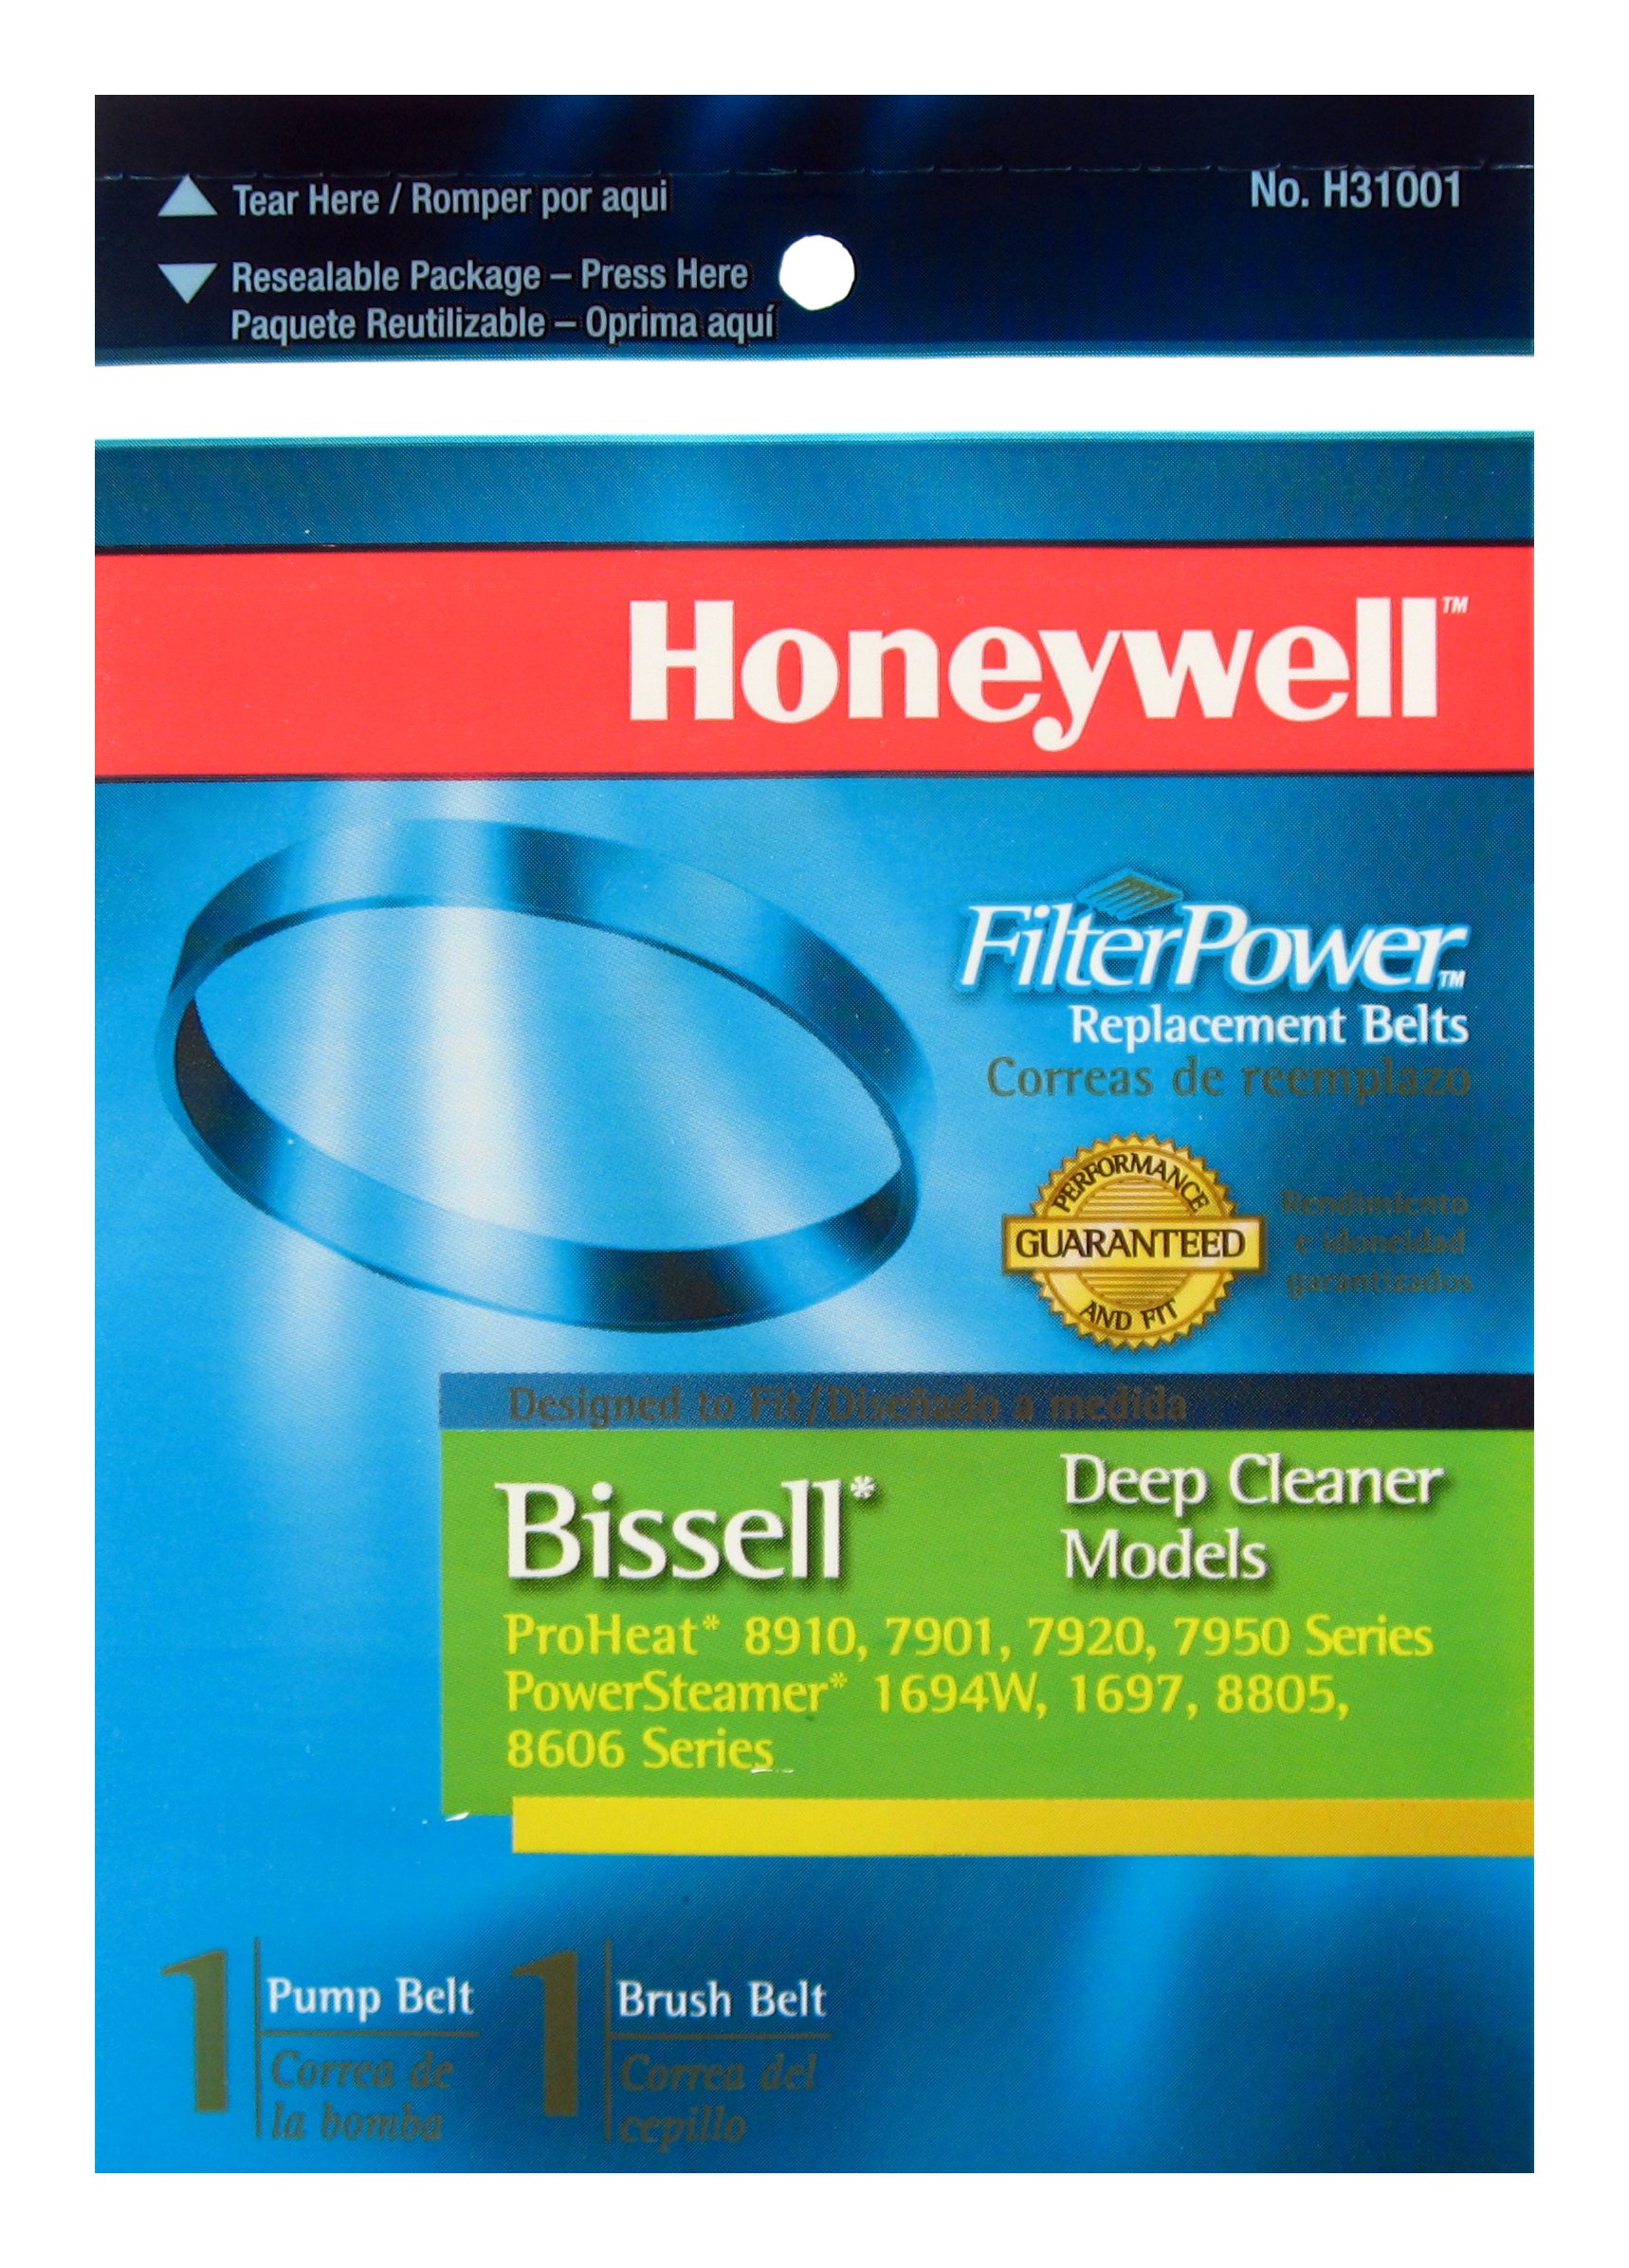 Honeywell H31001 Bissell Deep Cleaner Models; Contains 1 Pump Belt and 1 Brush Belt